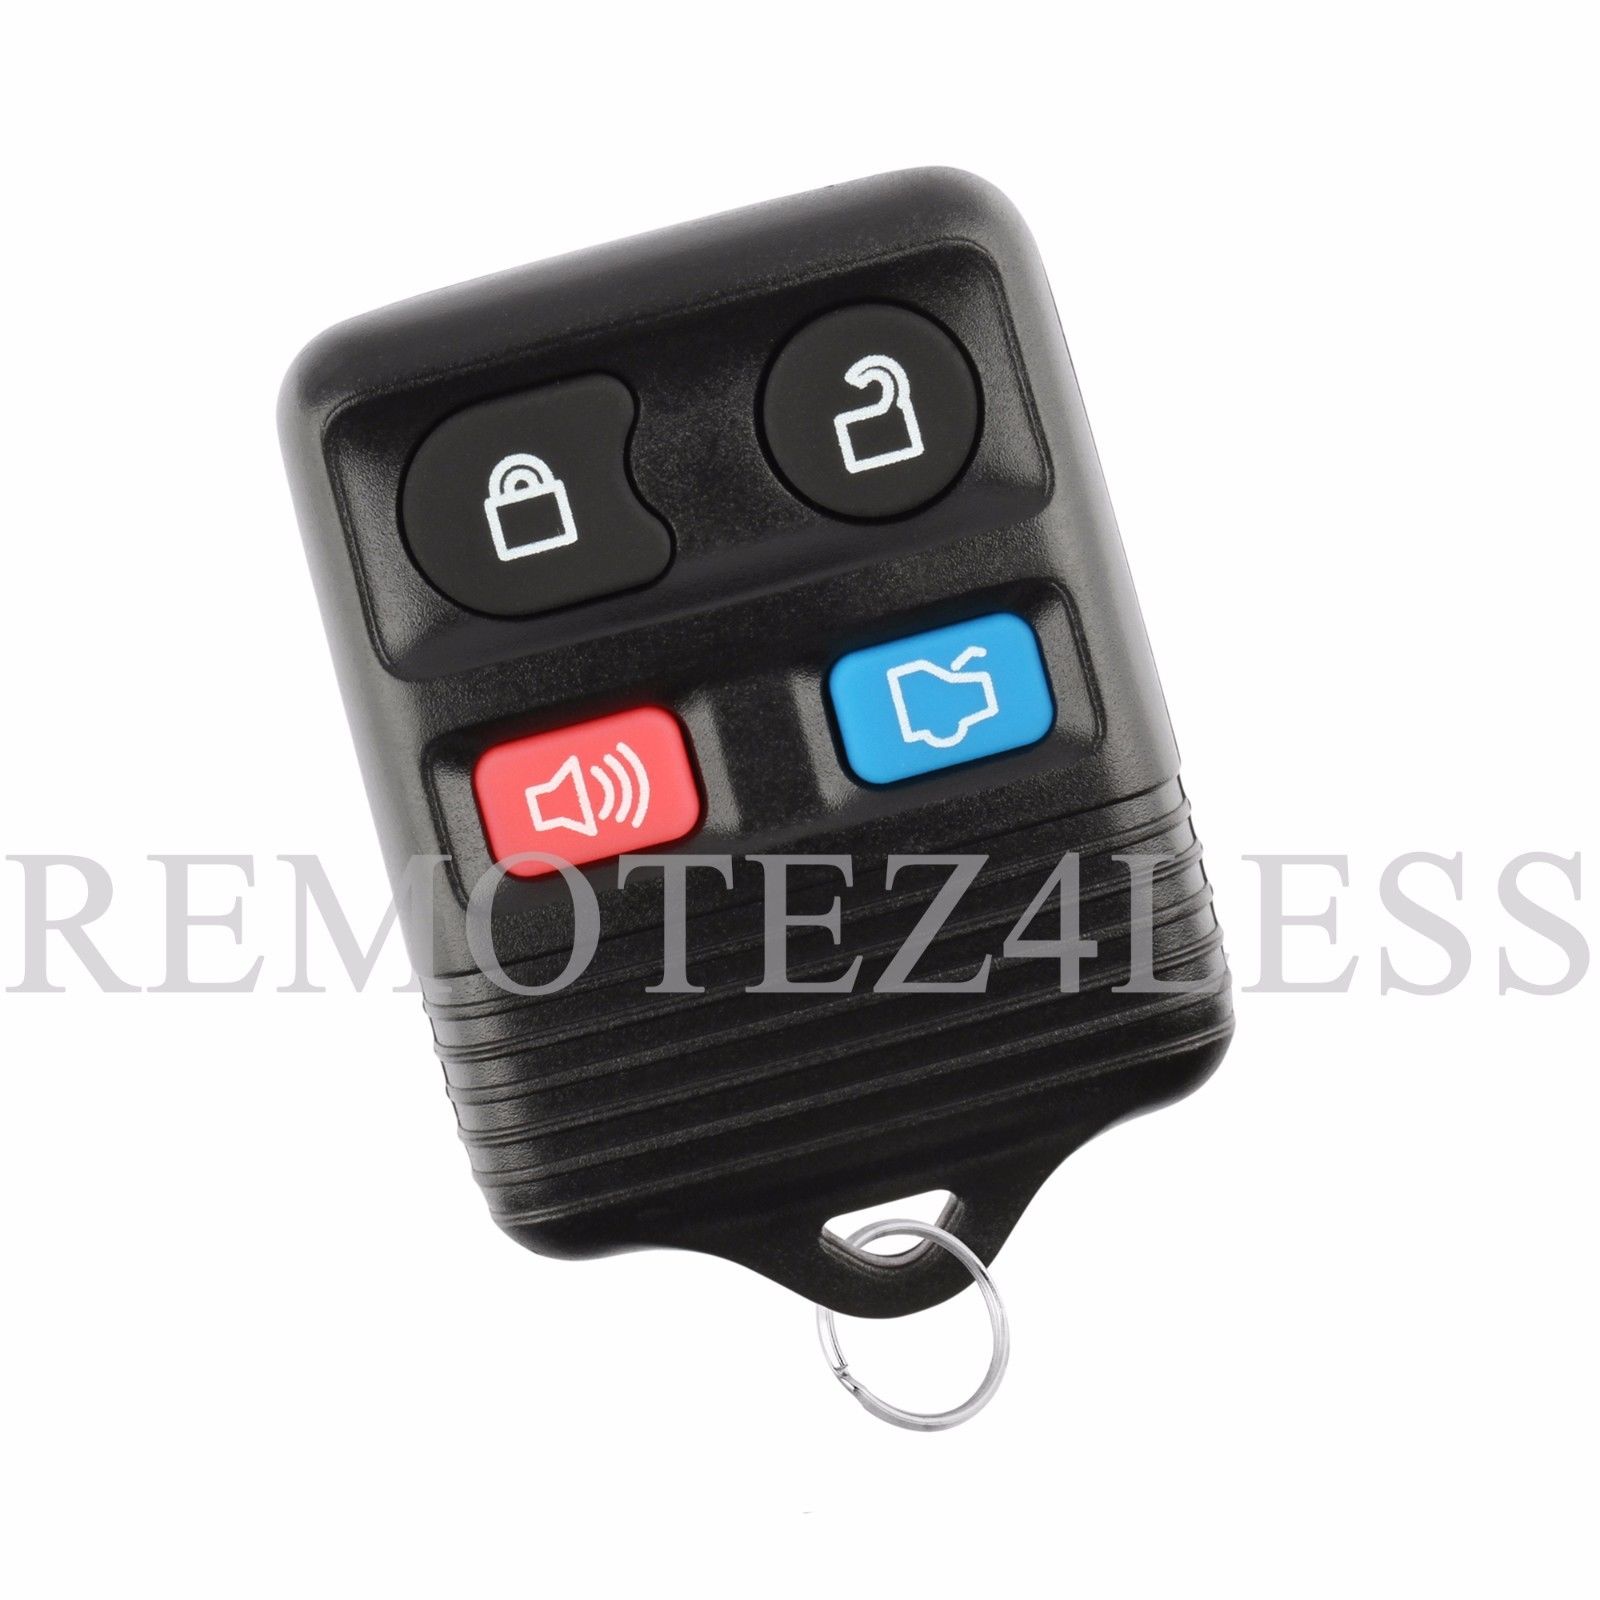 4b Replacement Keyless Entry Remote Key Car Fob for Ford Lincoln ...